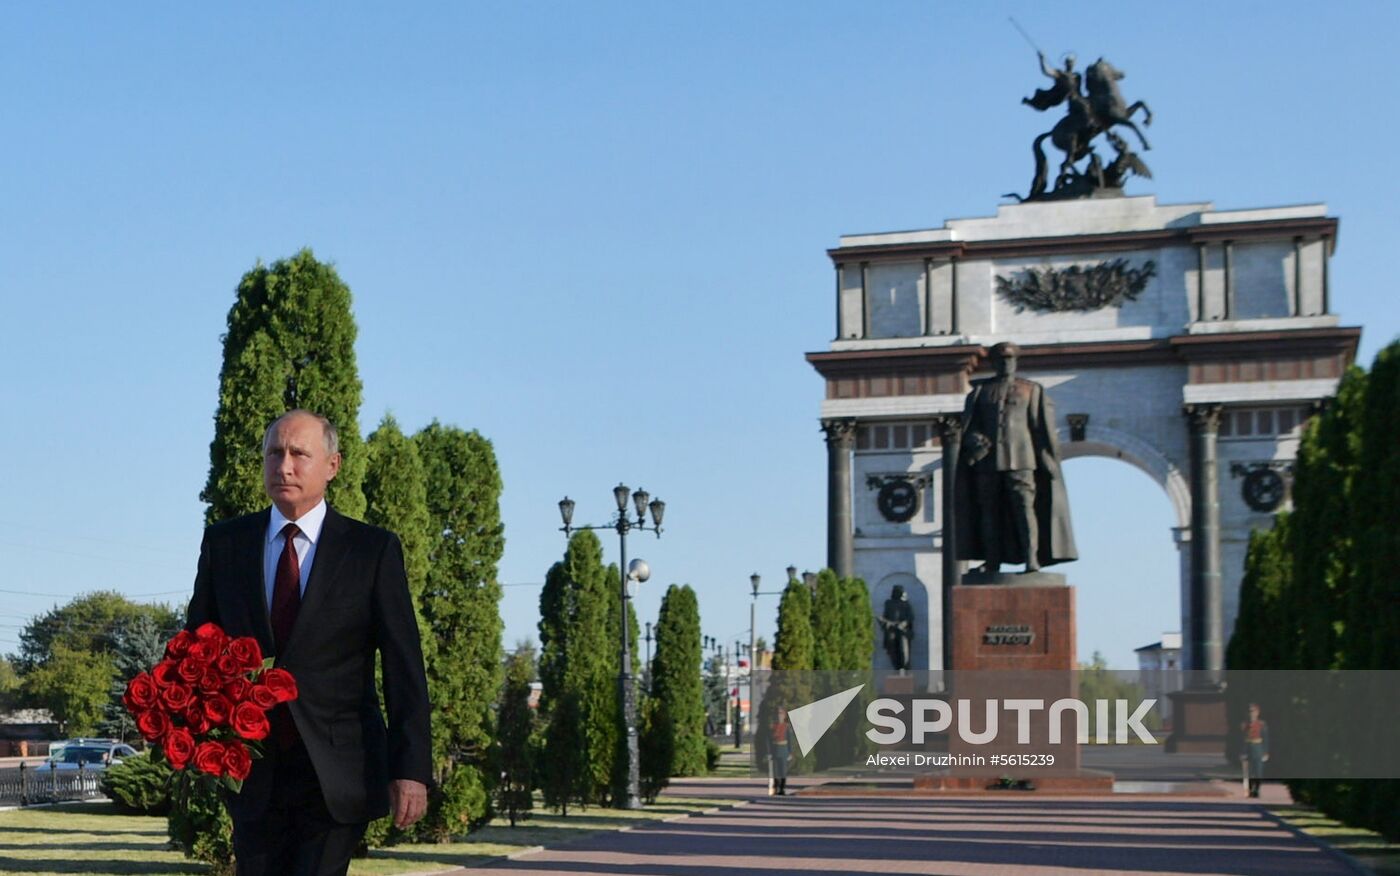 Presdient Putin's working visit to  Central Federal District